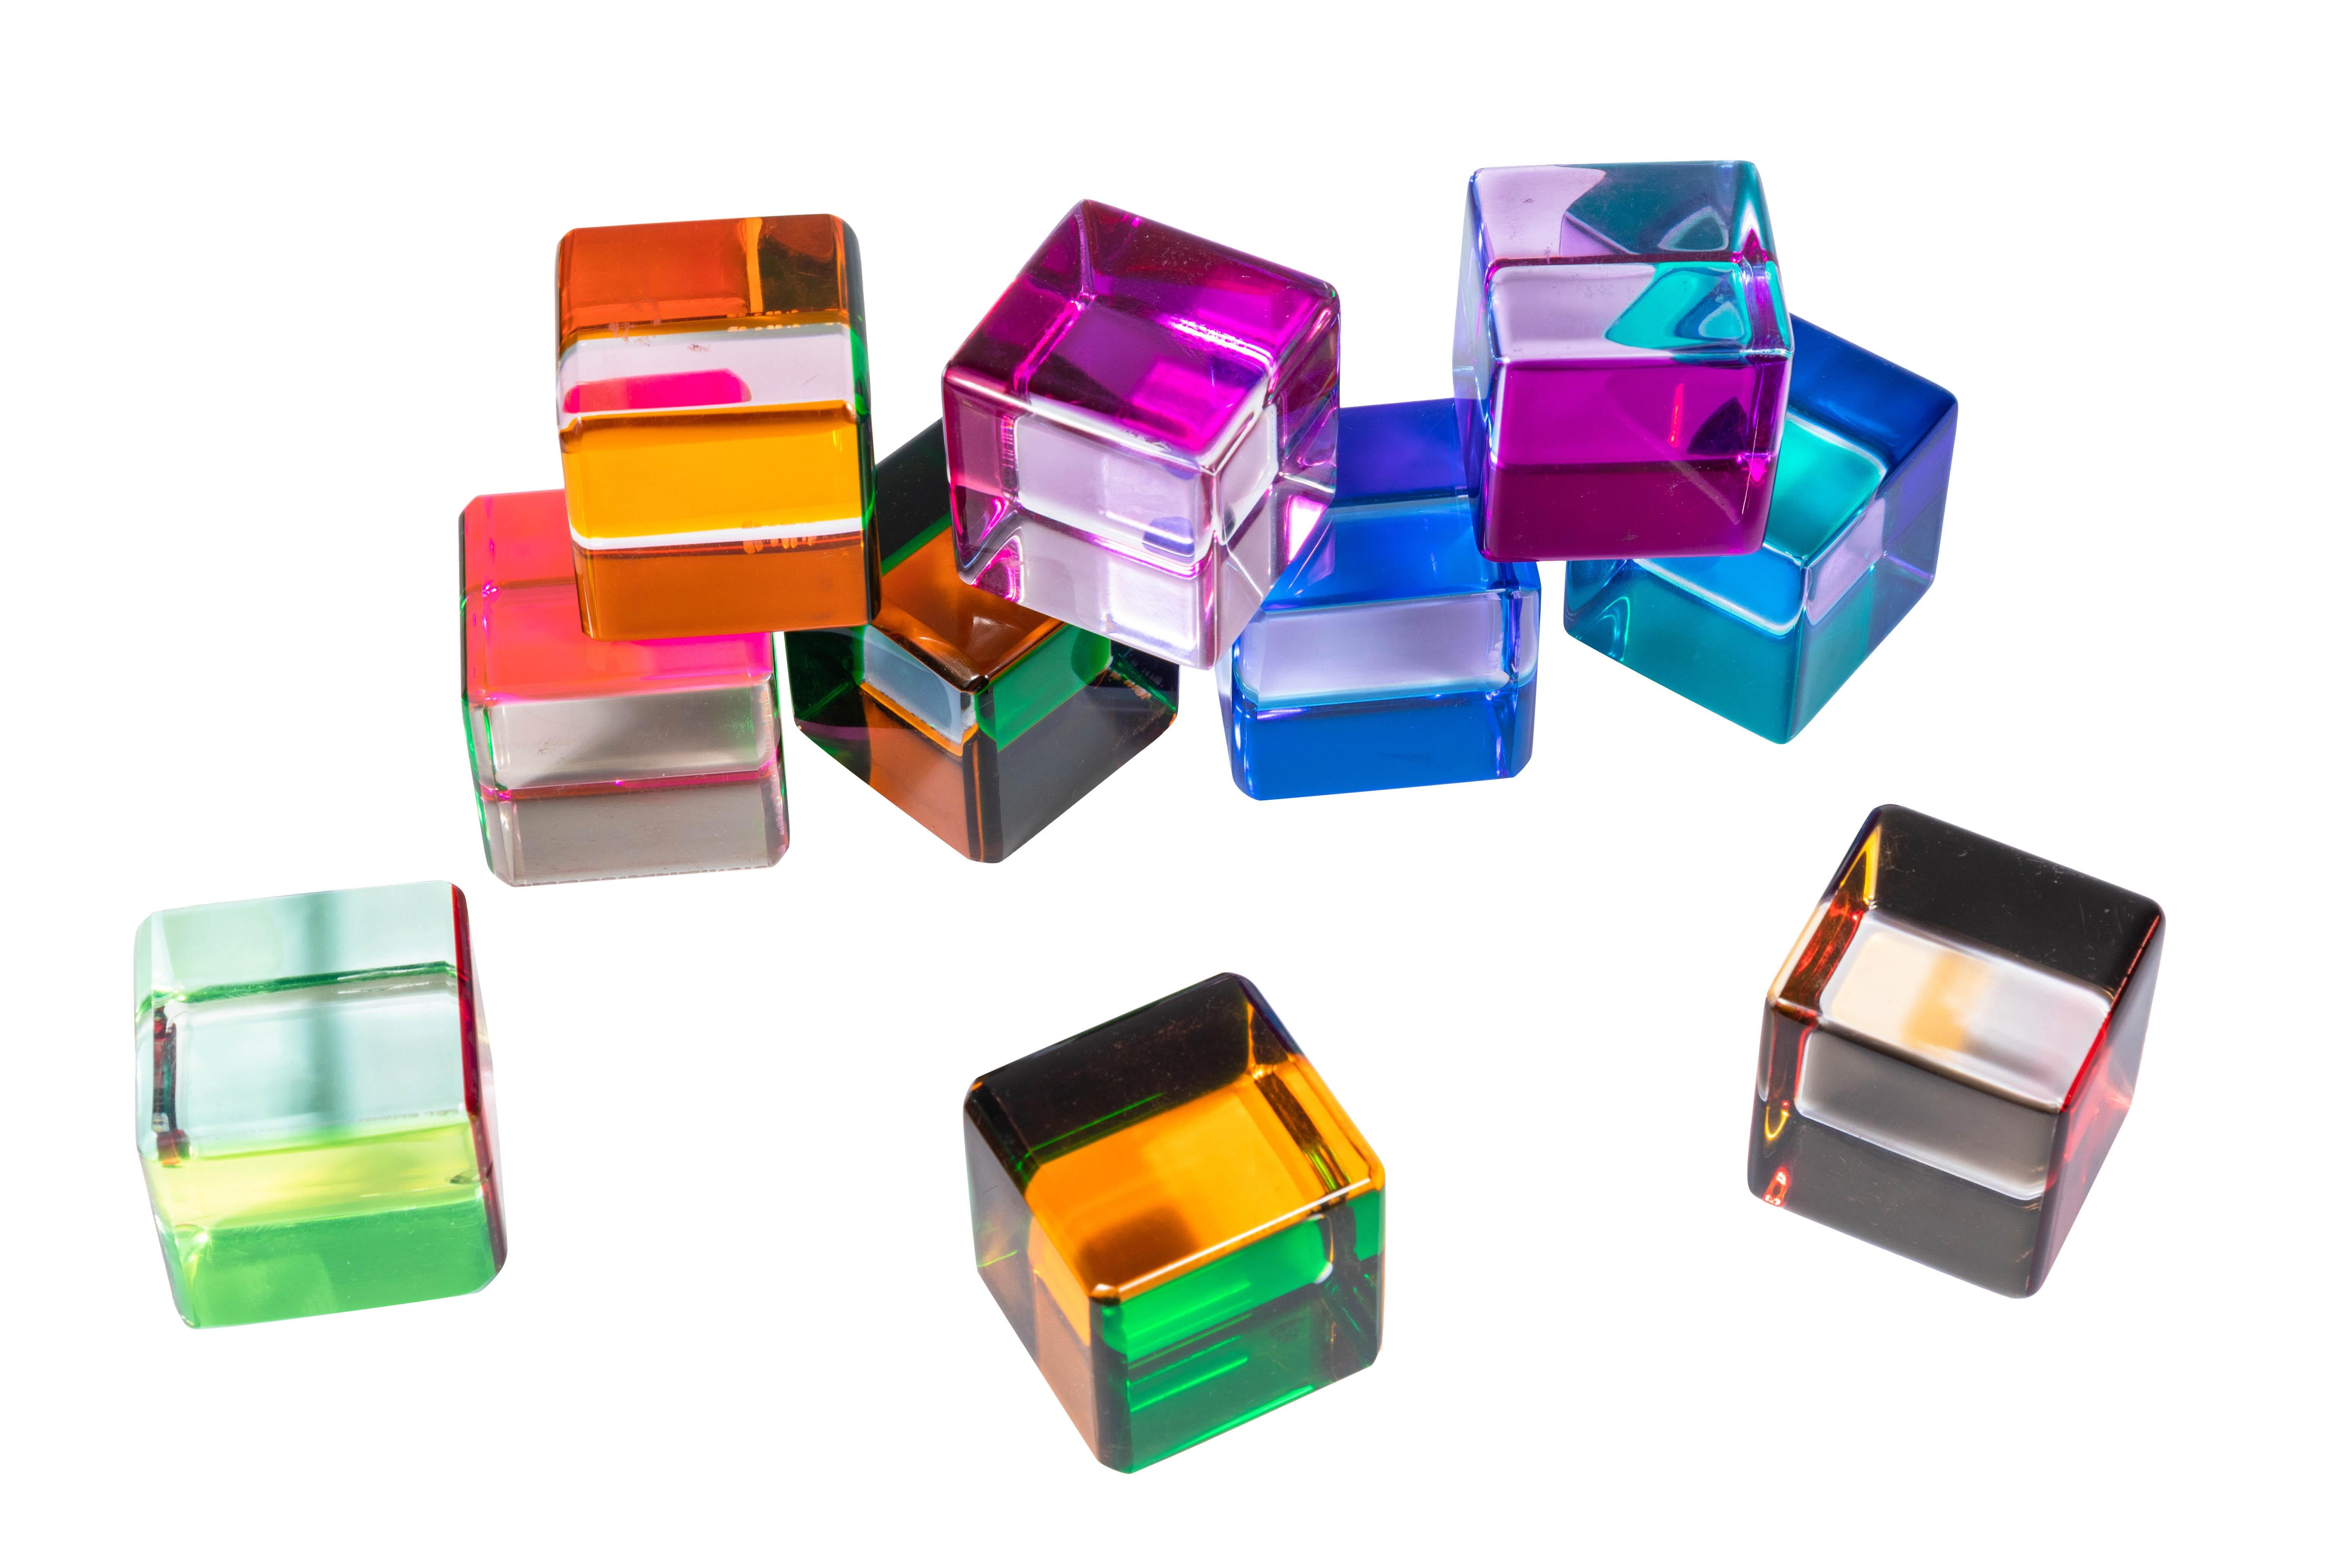 Fun, set of ten multicolored acrylic cubes by artist Vasa Mihich. Each cube side features different sheer neon colors. Can be displayed in endless variations.